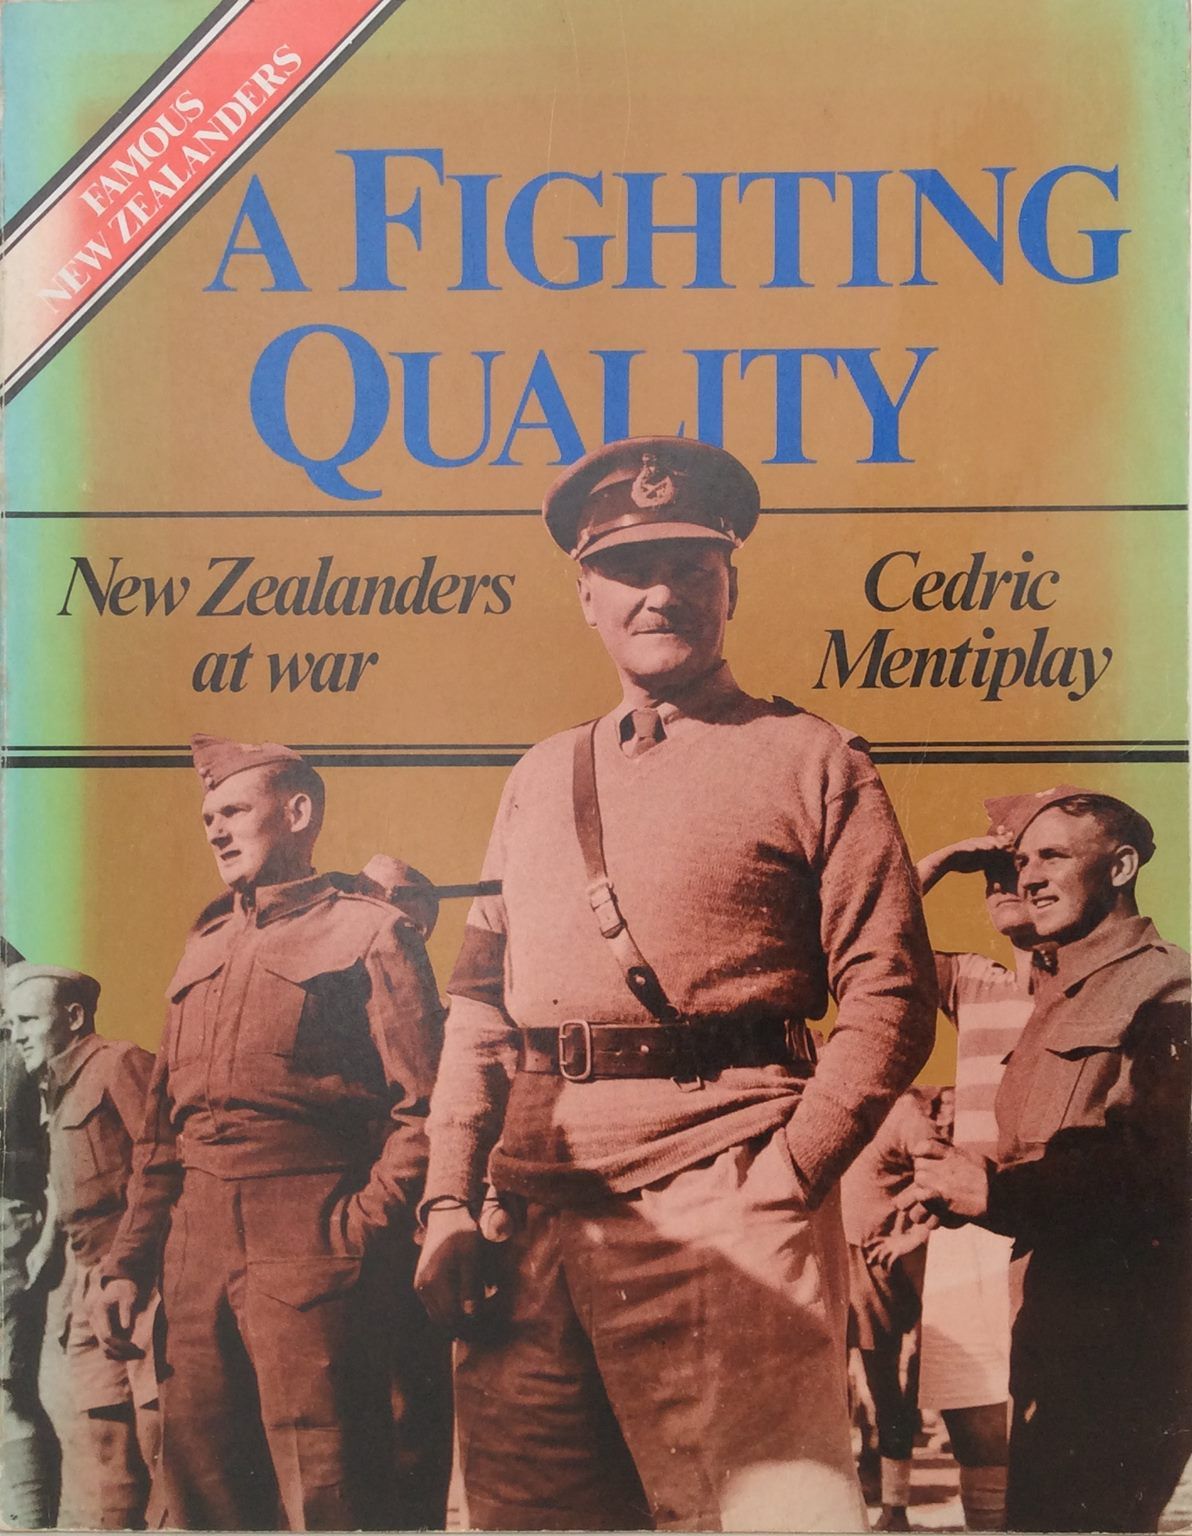 A FIGHTING QUALITY: New Zealanders At War